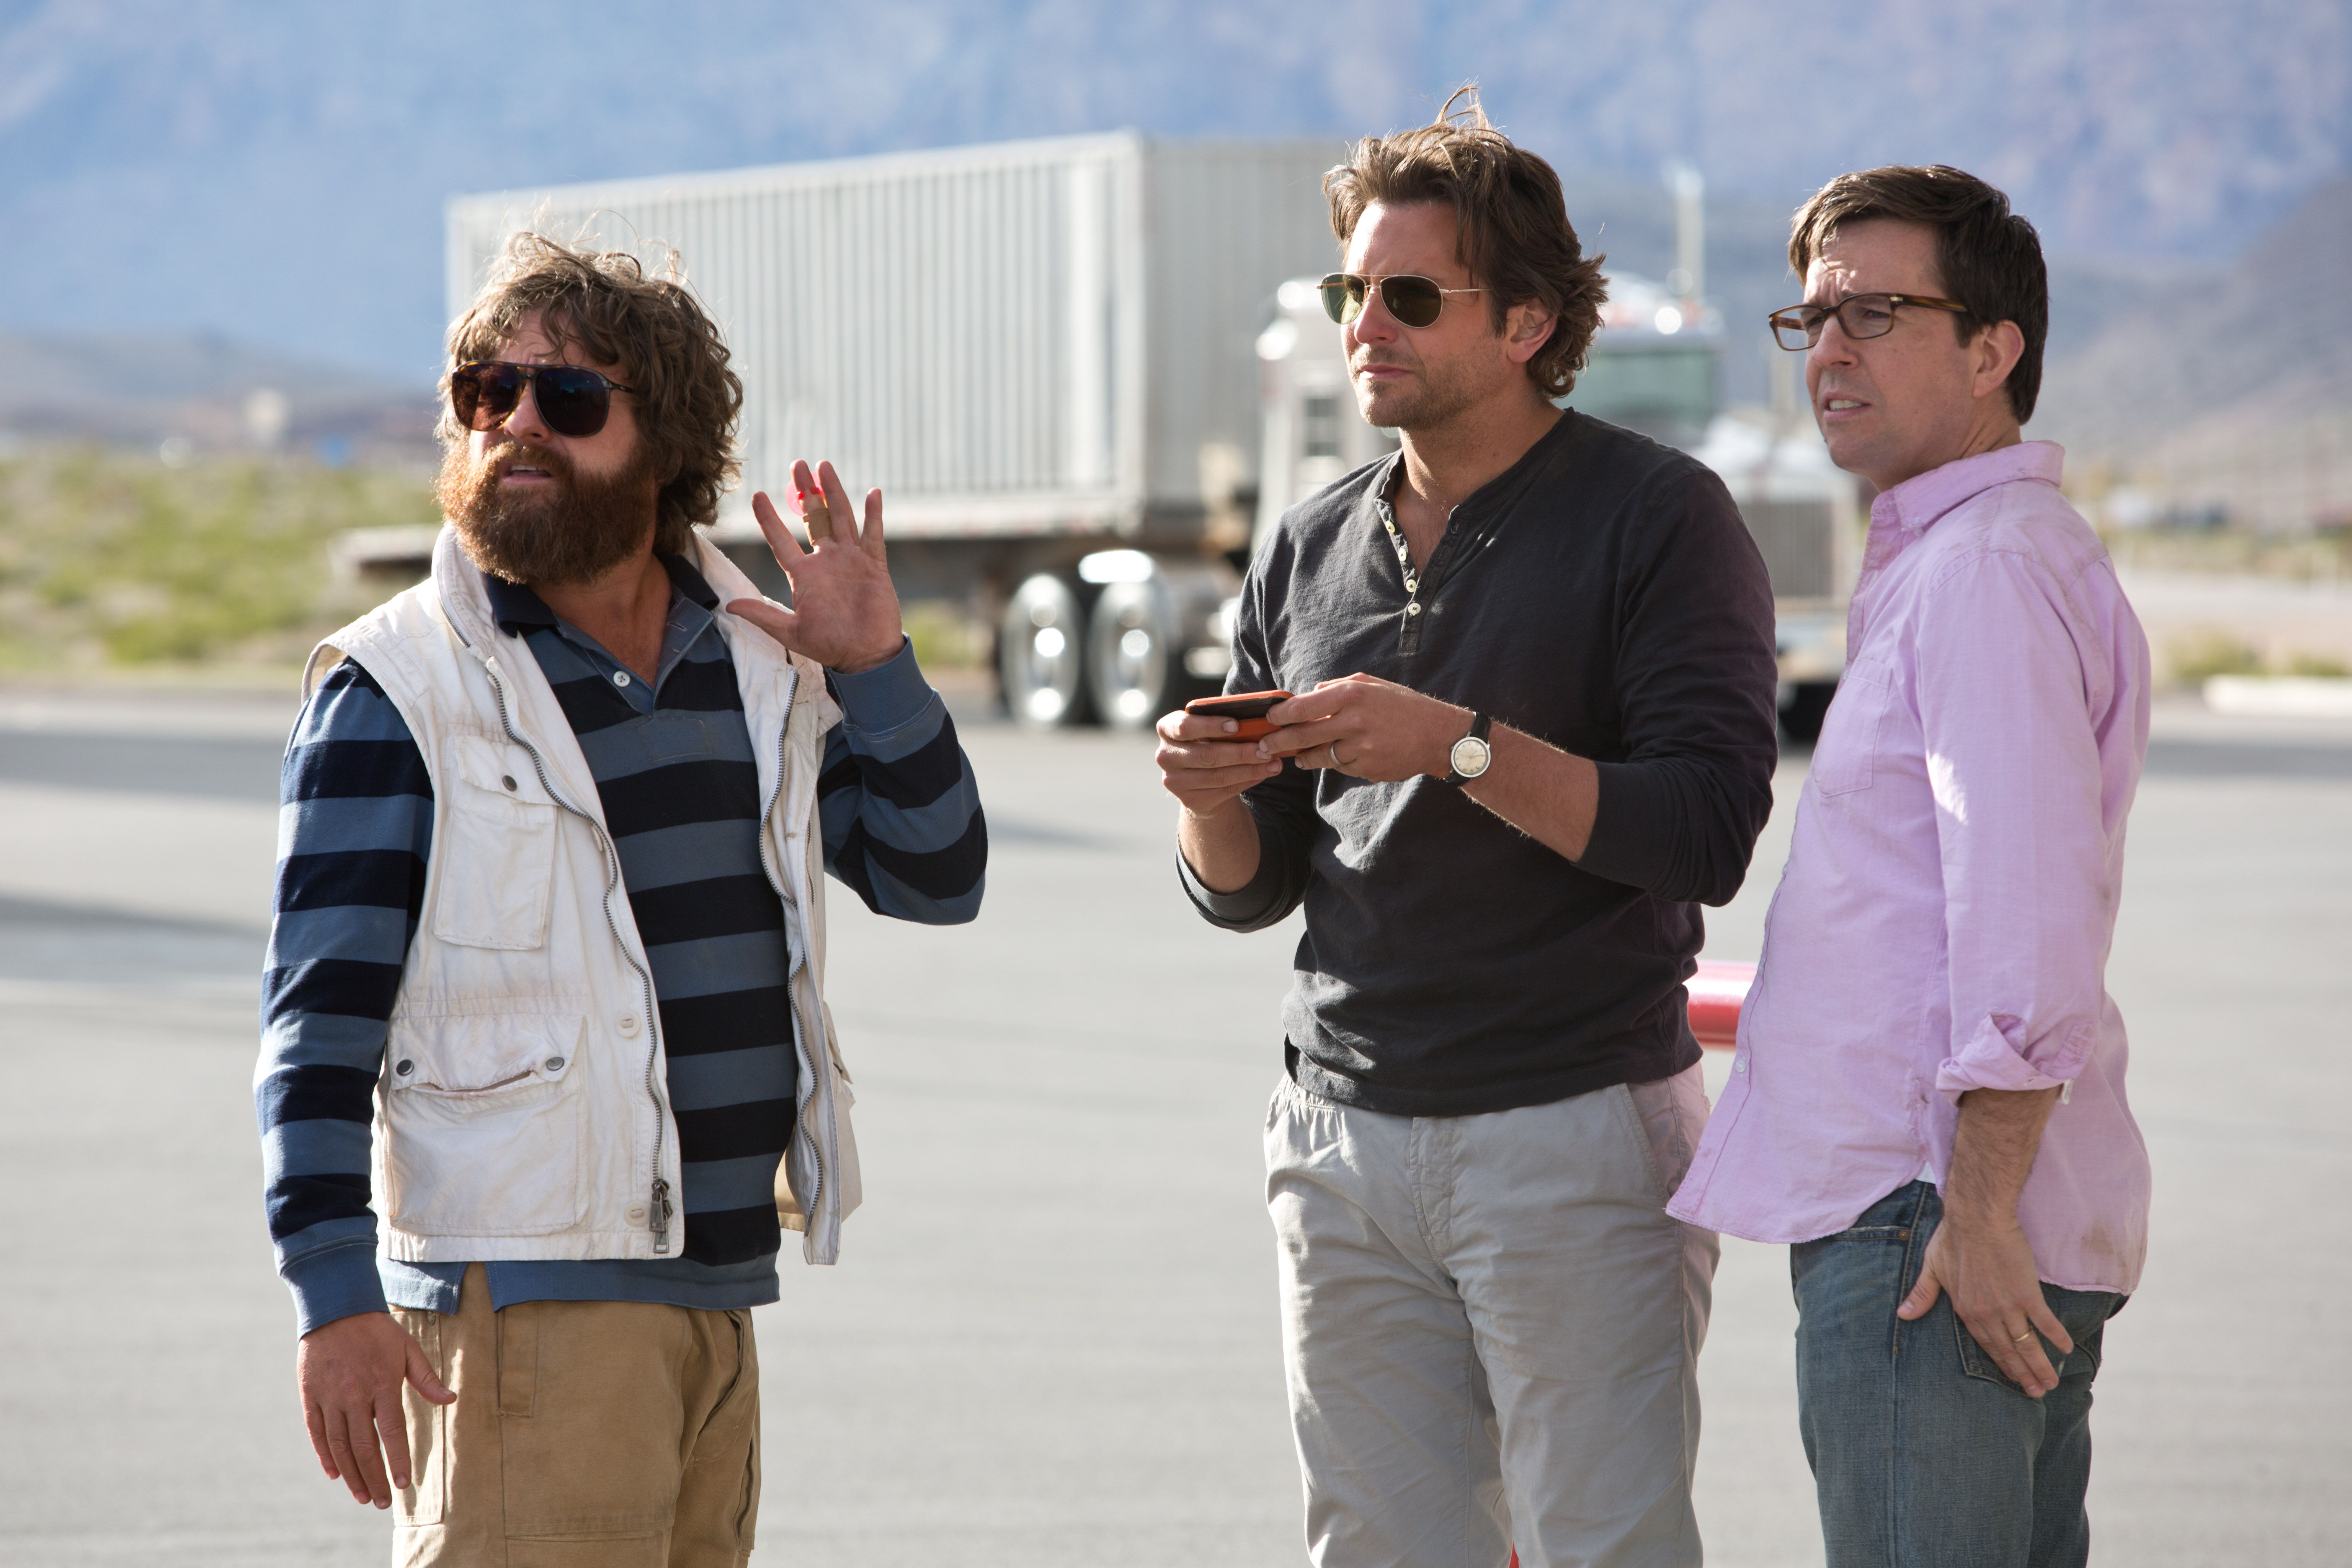 THE HANGOVER 3 Image. THE HANGOVER PART III Stars Bradley Cooper, Ed Helms, and Zach Galifianakis